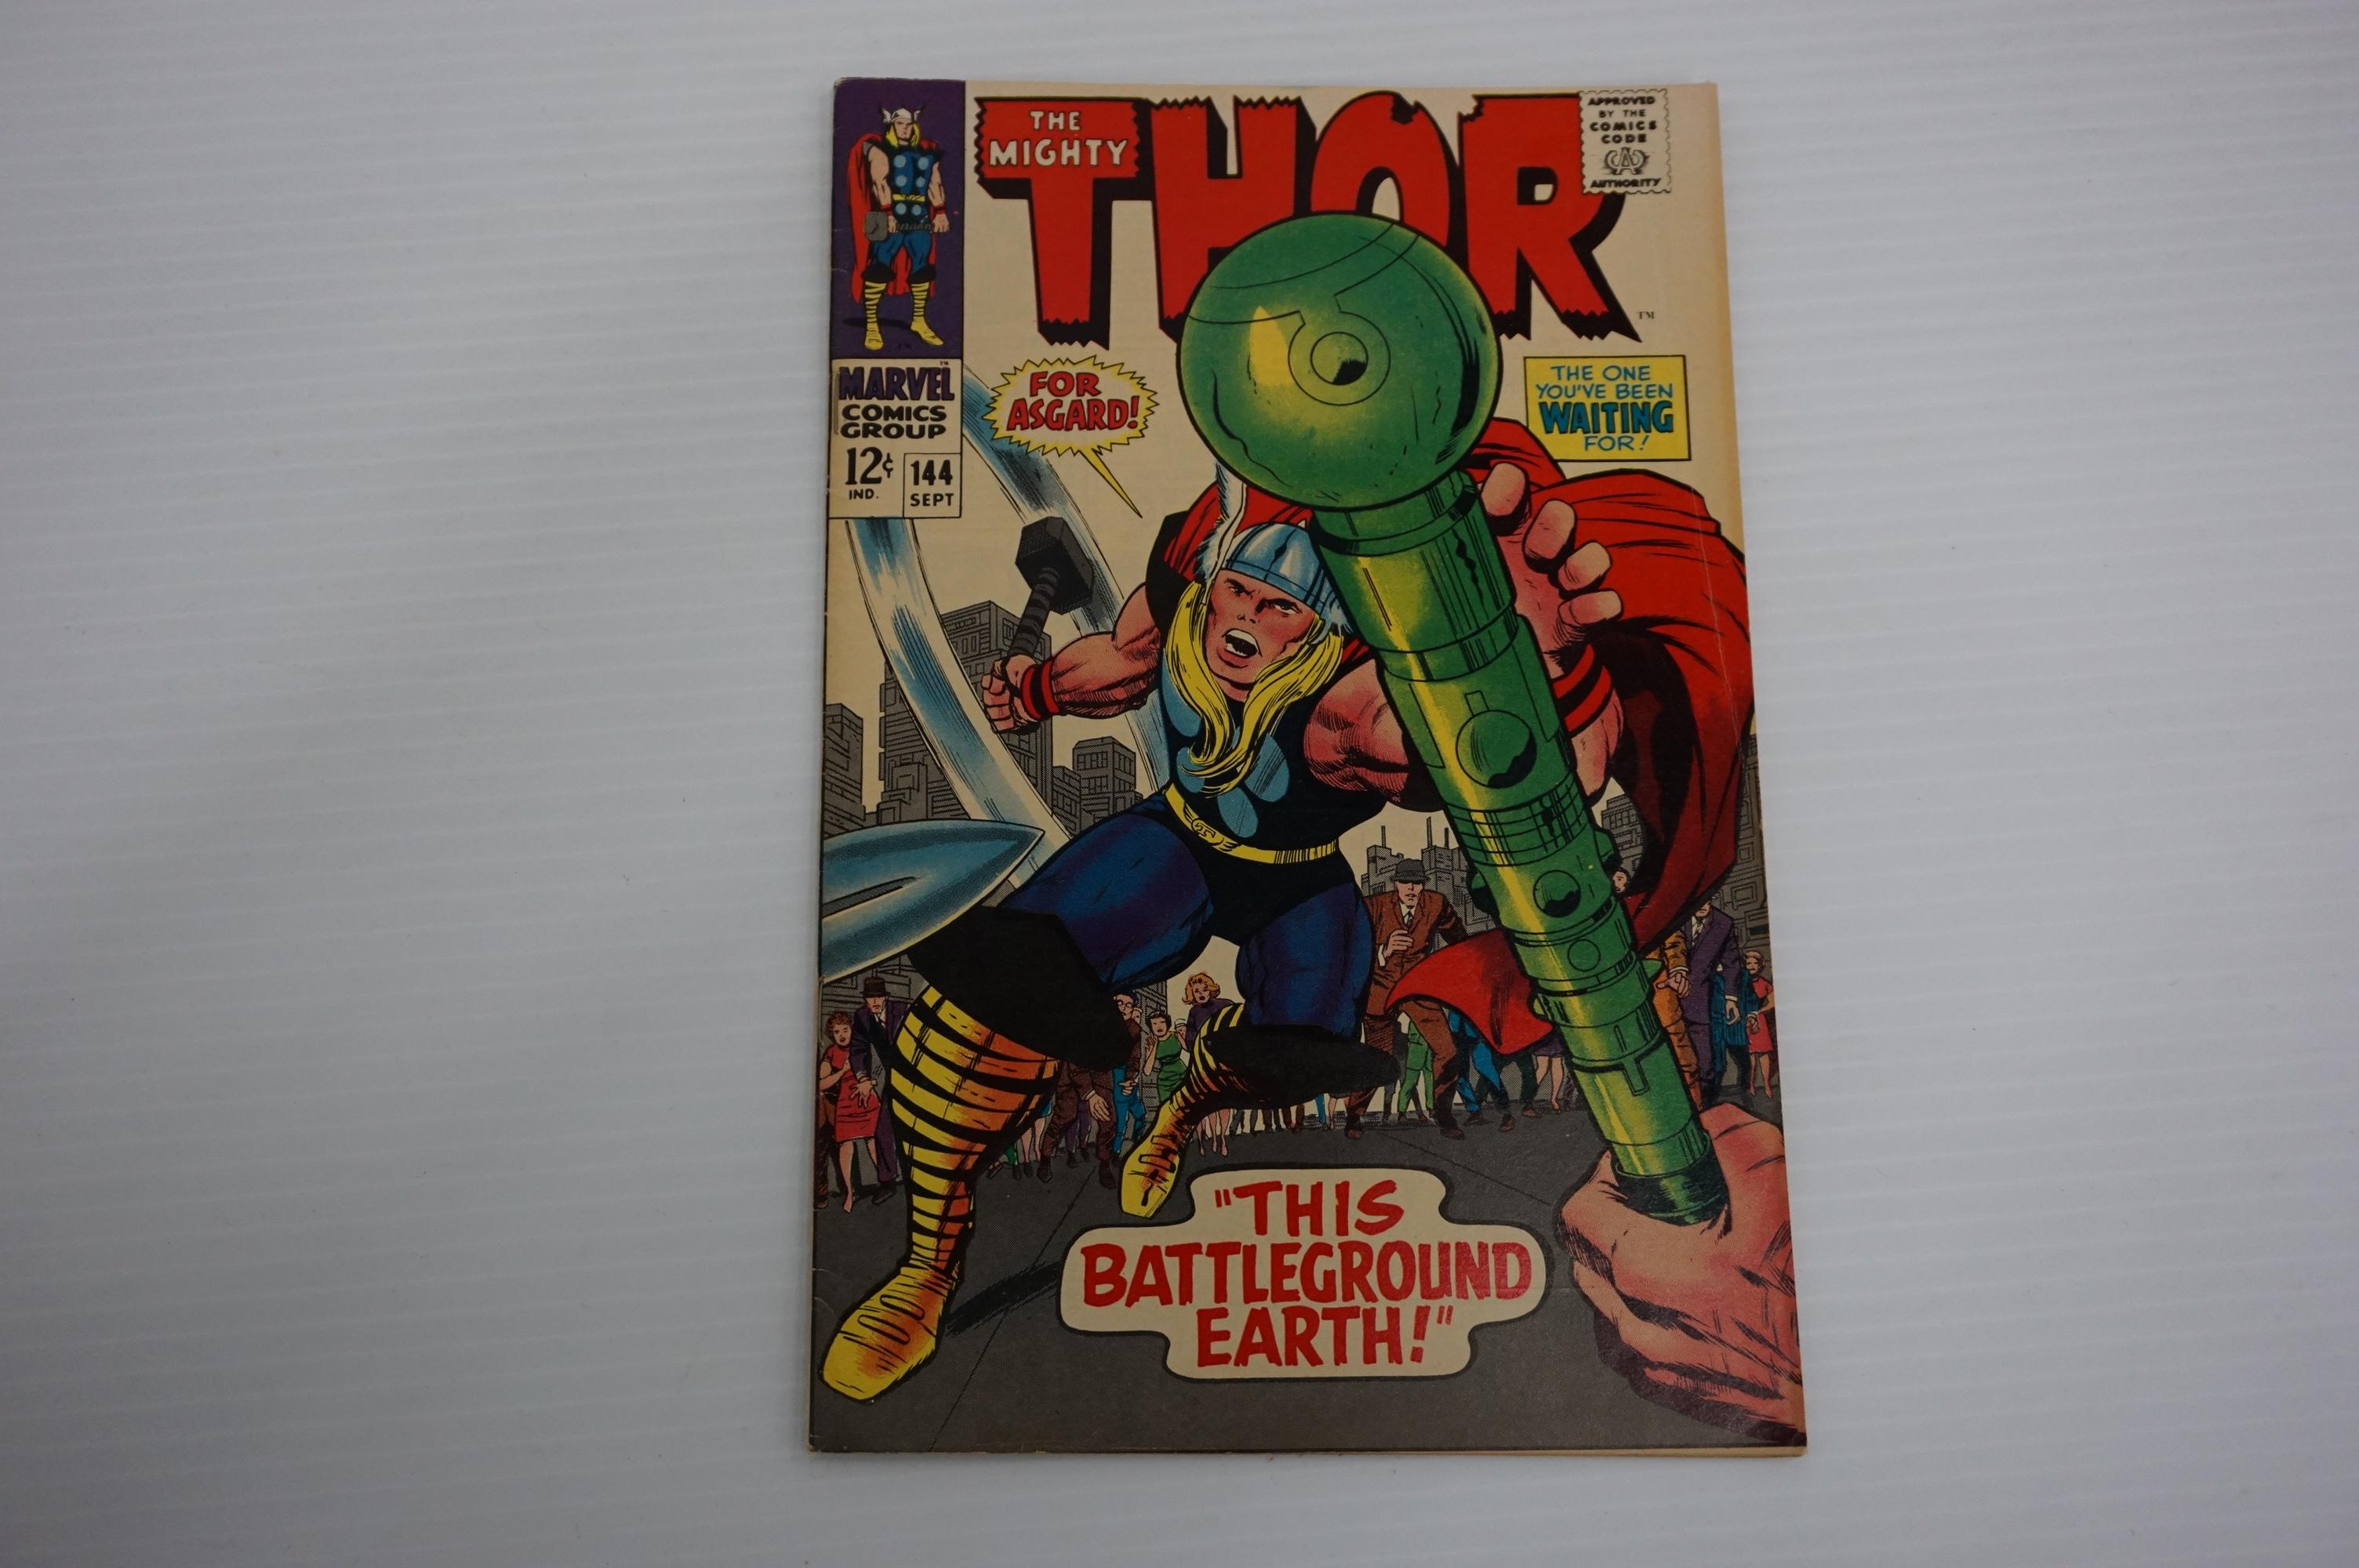 MIGHTY THOR #144 (1967)